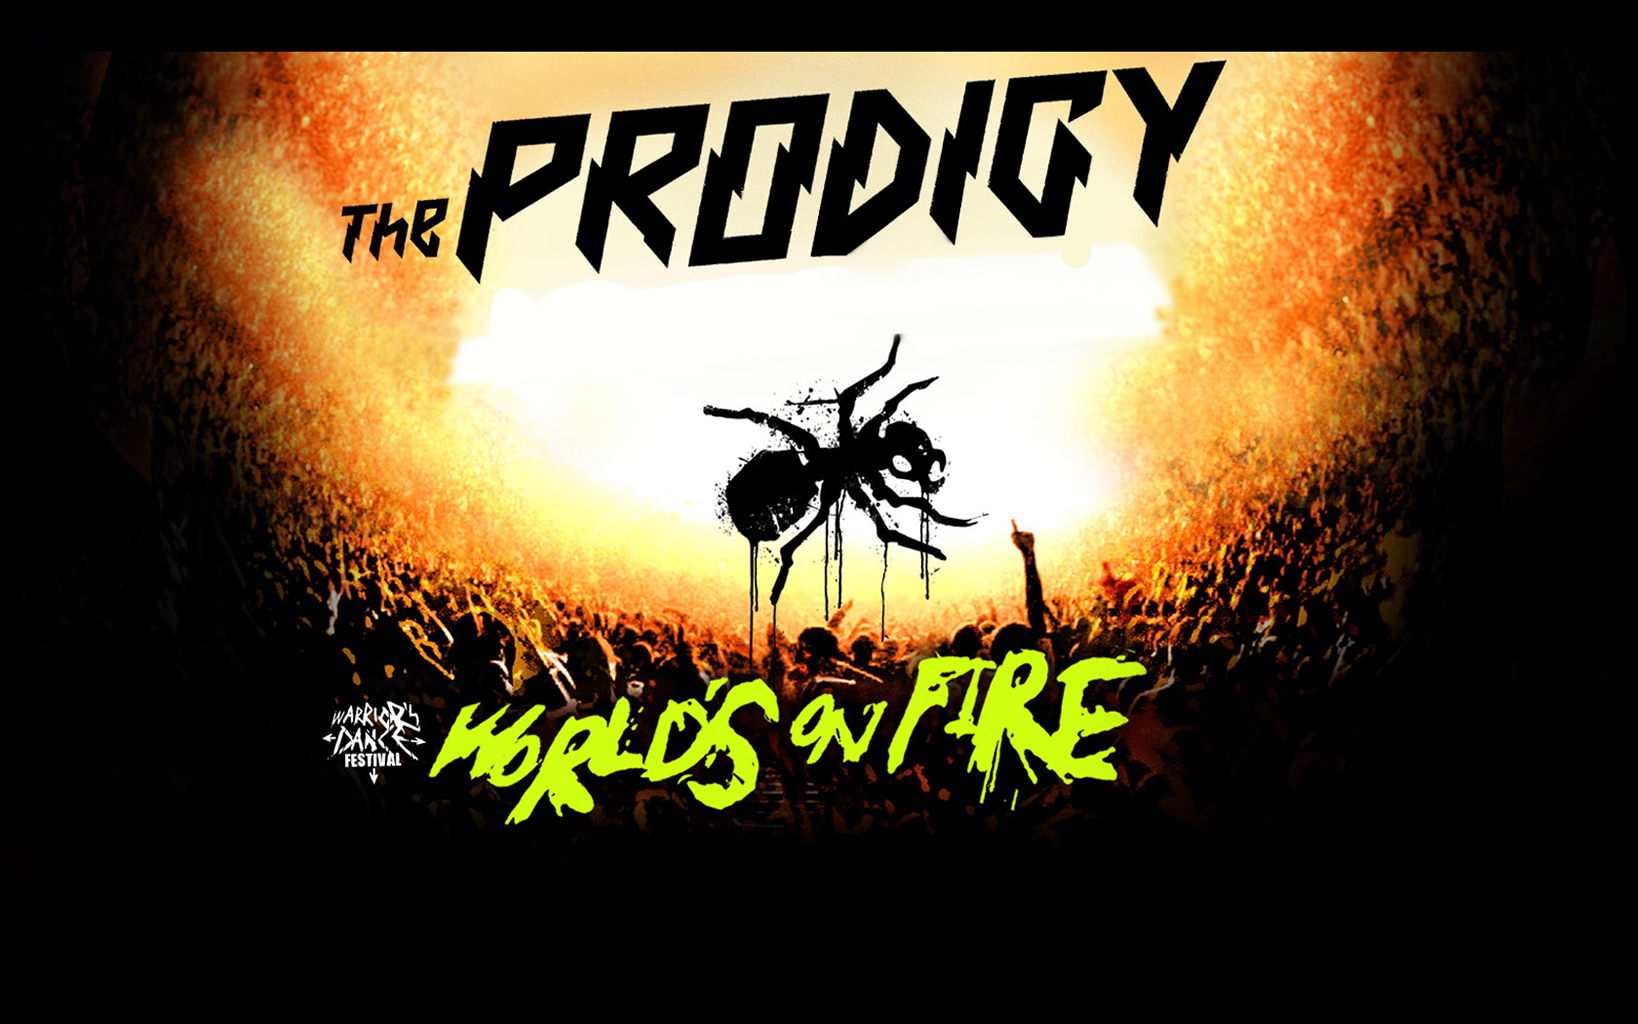 prodigy wallpaper,font,text,graphic design,graphics,darkness